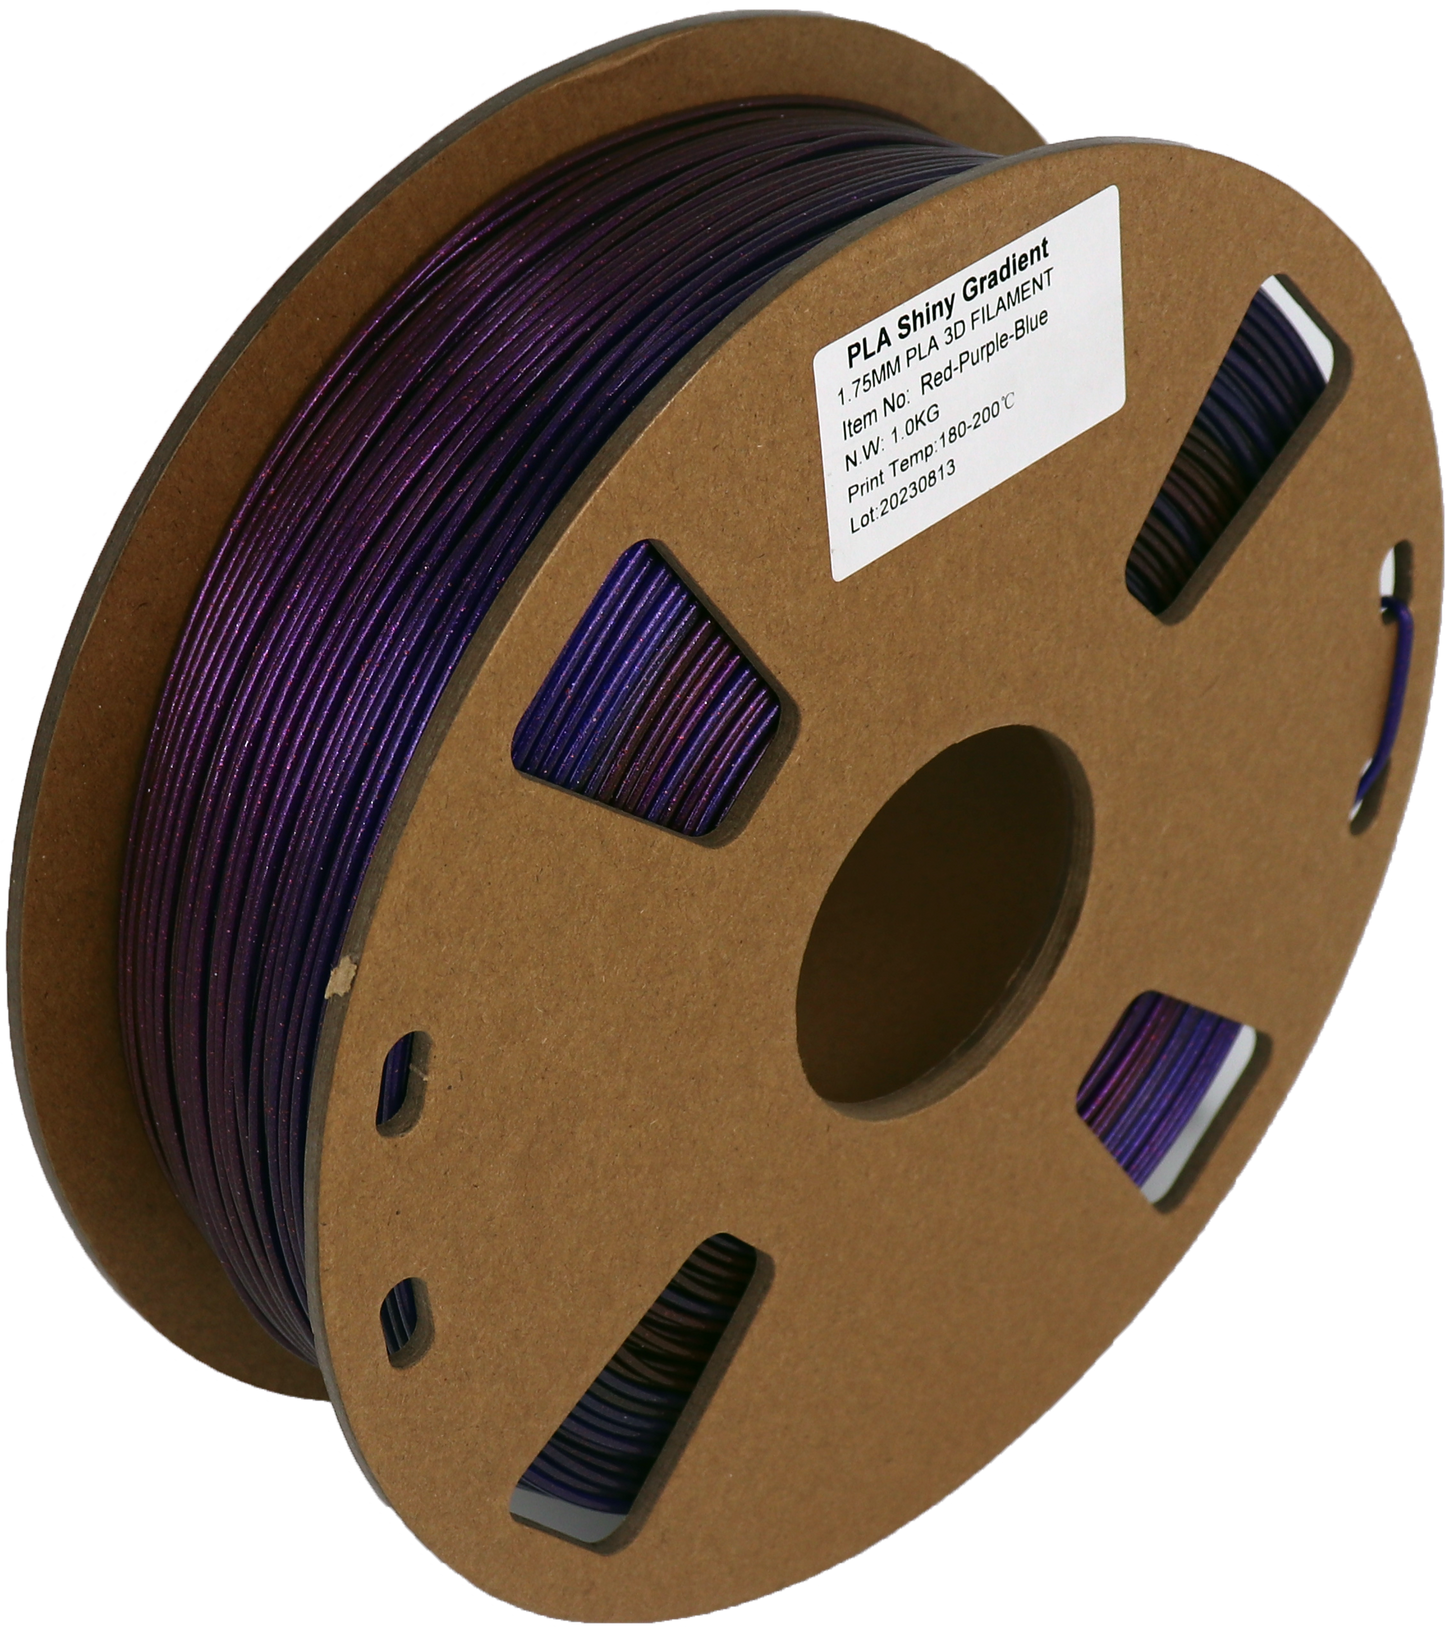 PS Imports PLA 1.75mm x Shiny Gradient-Red-Purple-Blue